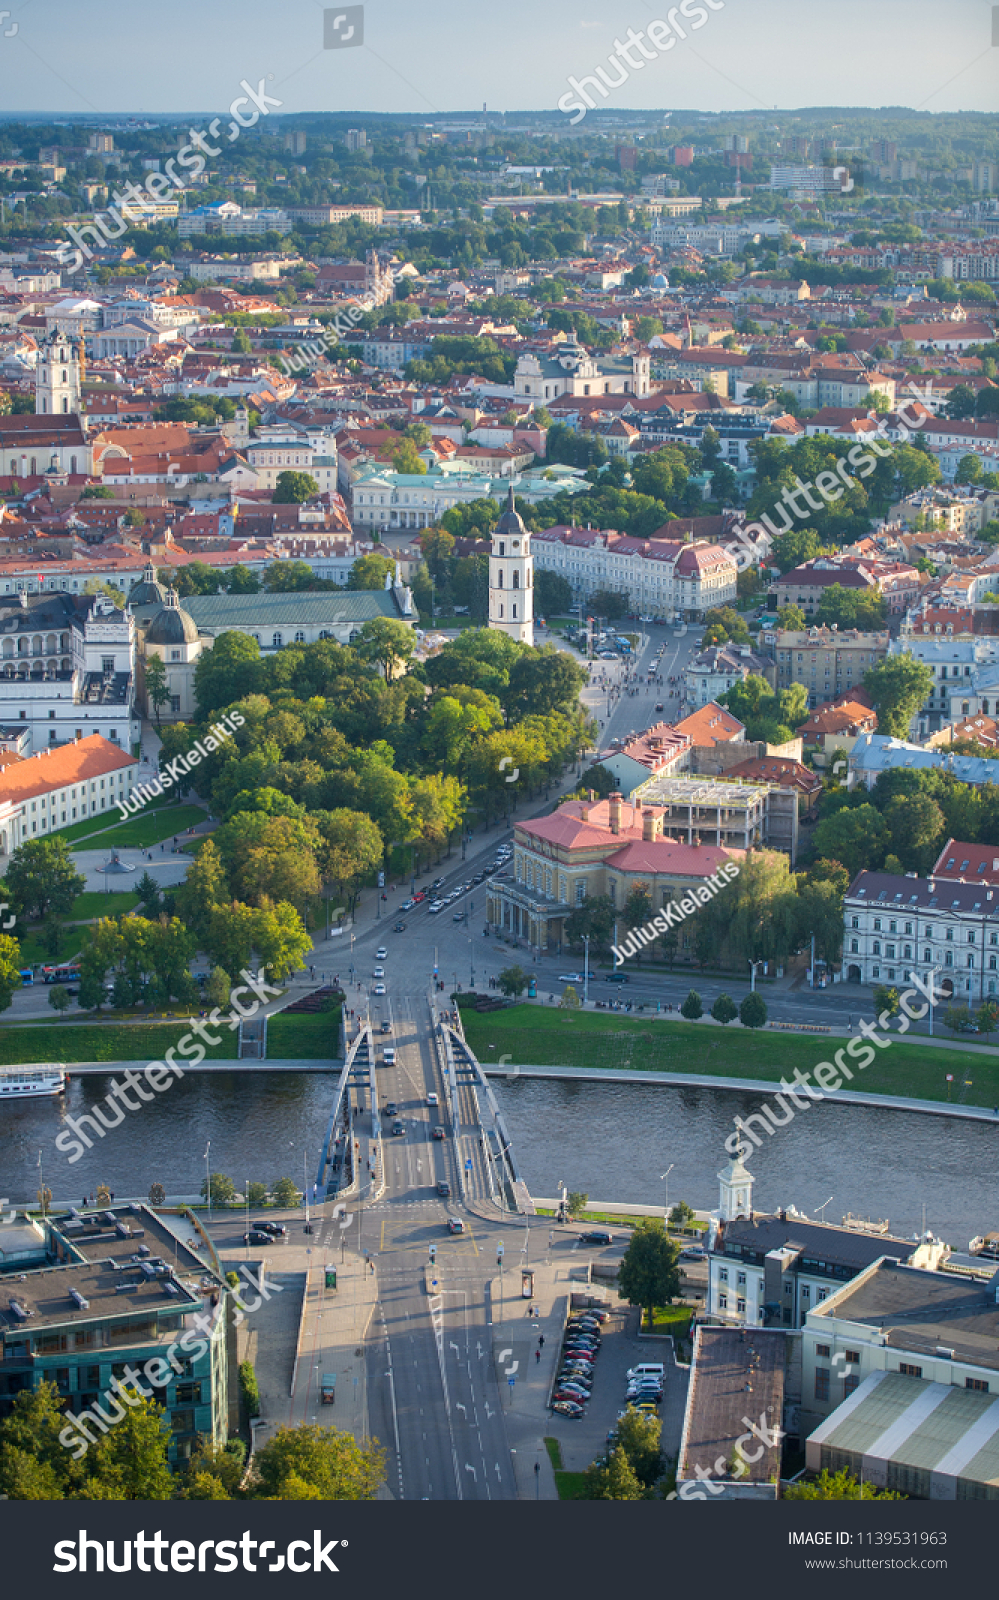 VILNIUS, LITHUANIA - SEP 16, 2017: Aerial View of Cathedral Square of Vilnius. Vilnius is known for its Old Town of beautiful architecture, declared a UNESCO World Heritage Site. #1139531963